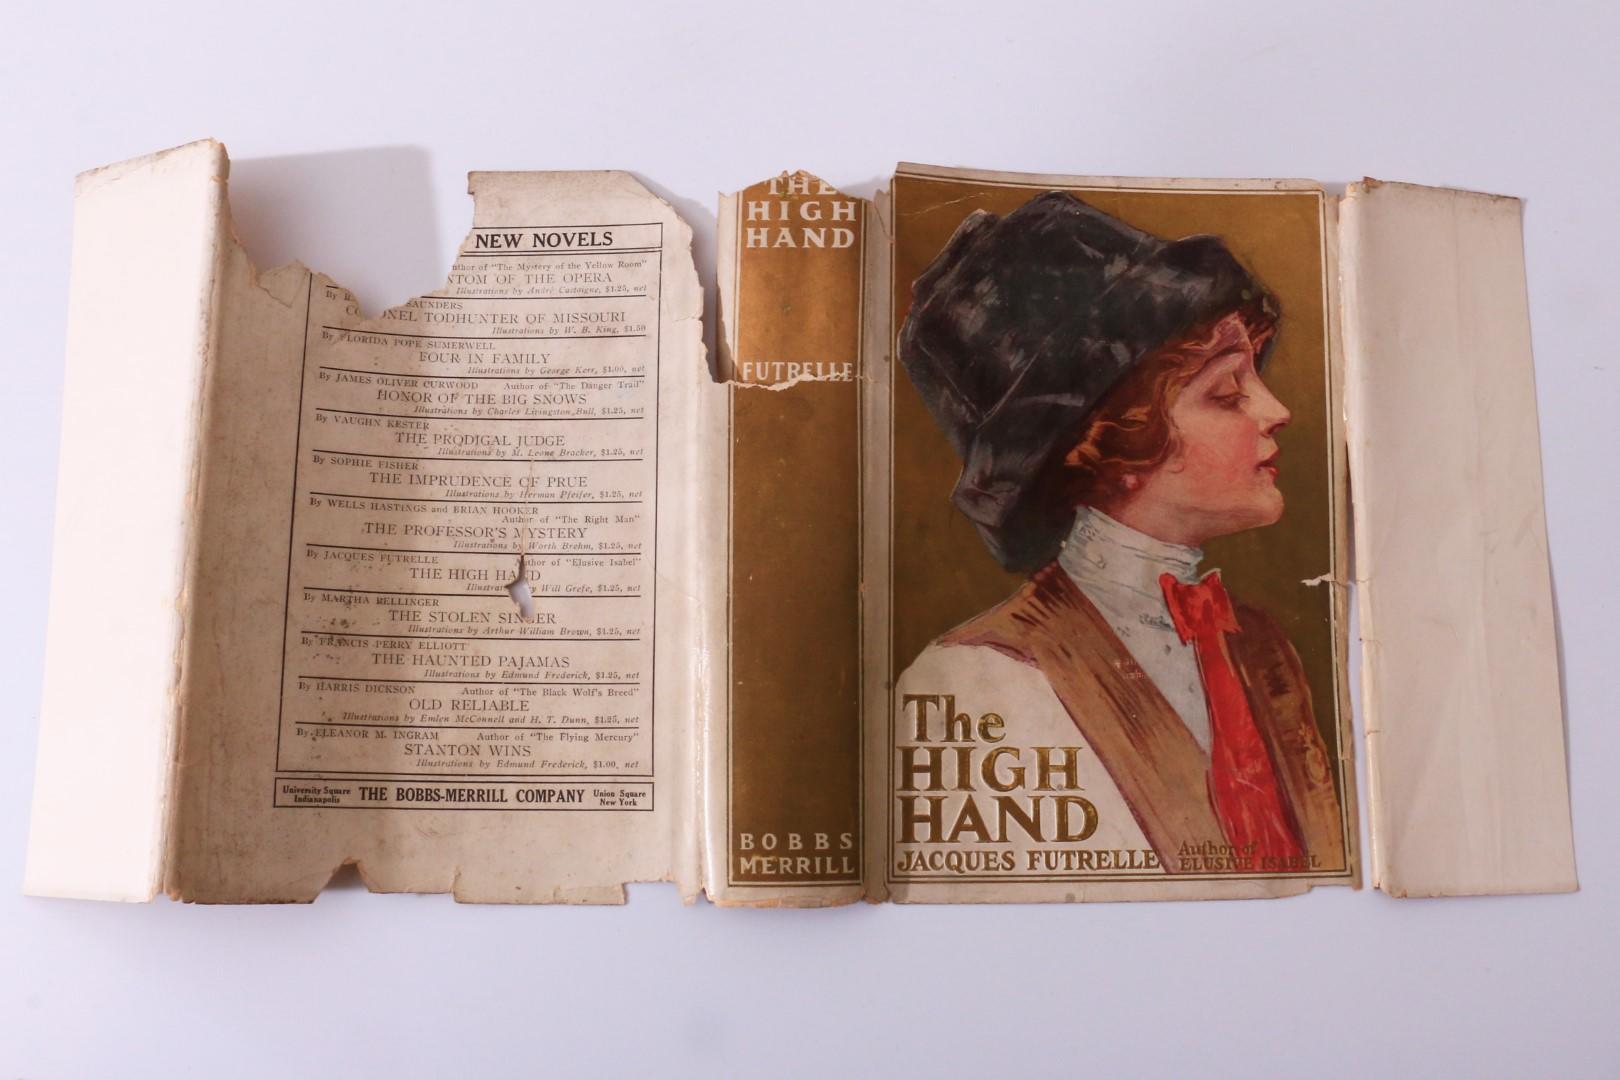 Jacques Futrelle - The High Hand - Bobbs Merrill, 1911, First Edition.